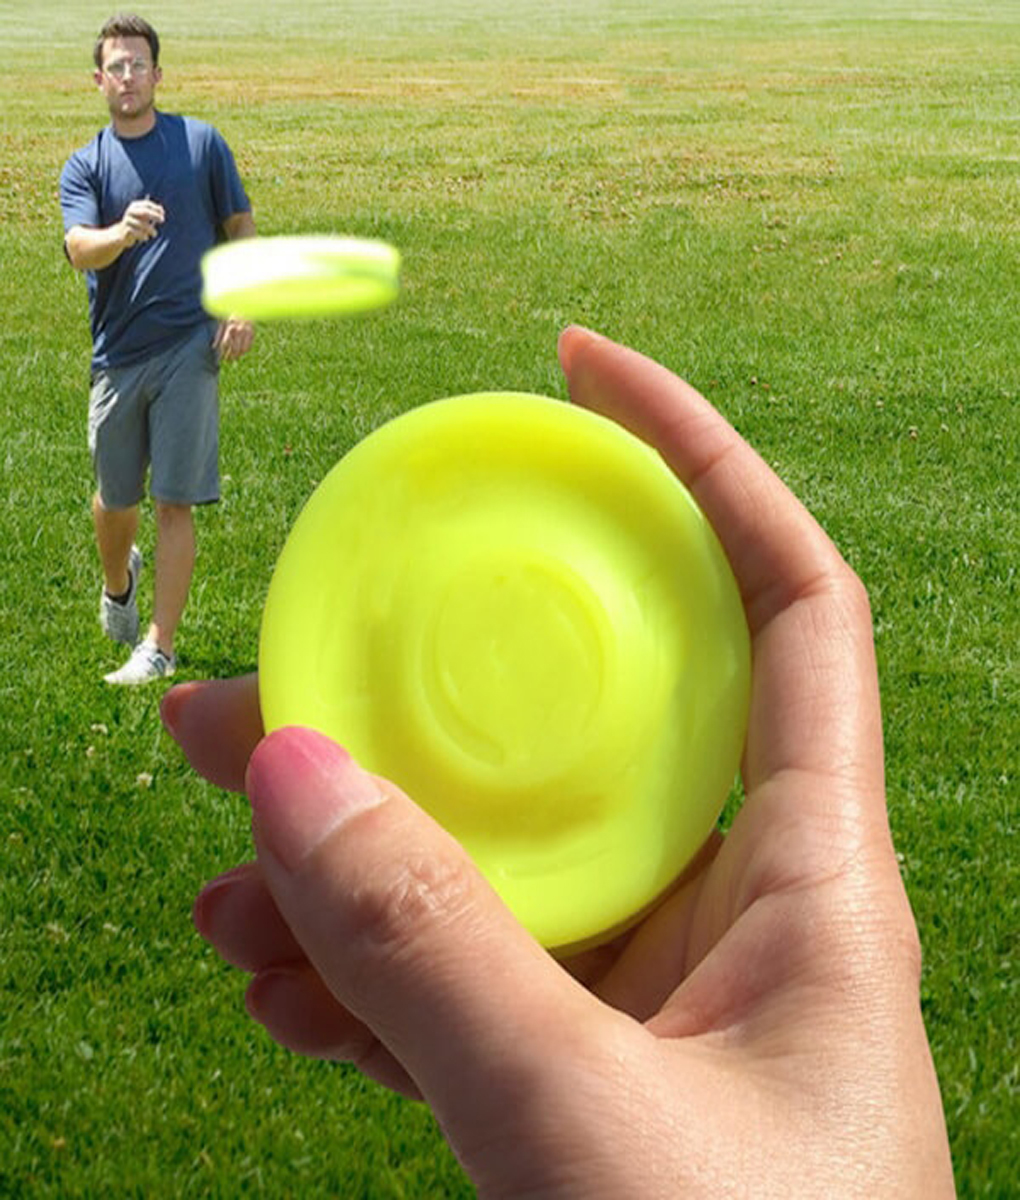 Frisbee Mini Pocket Flexible New Spin Catching Game Flying Disc 